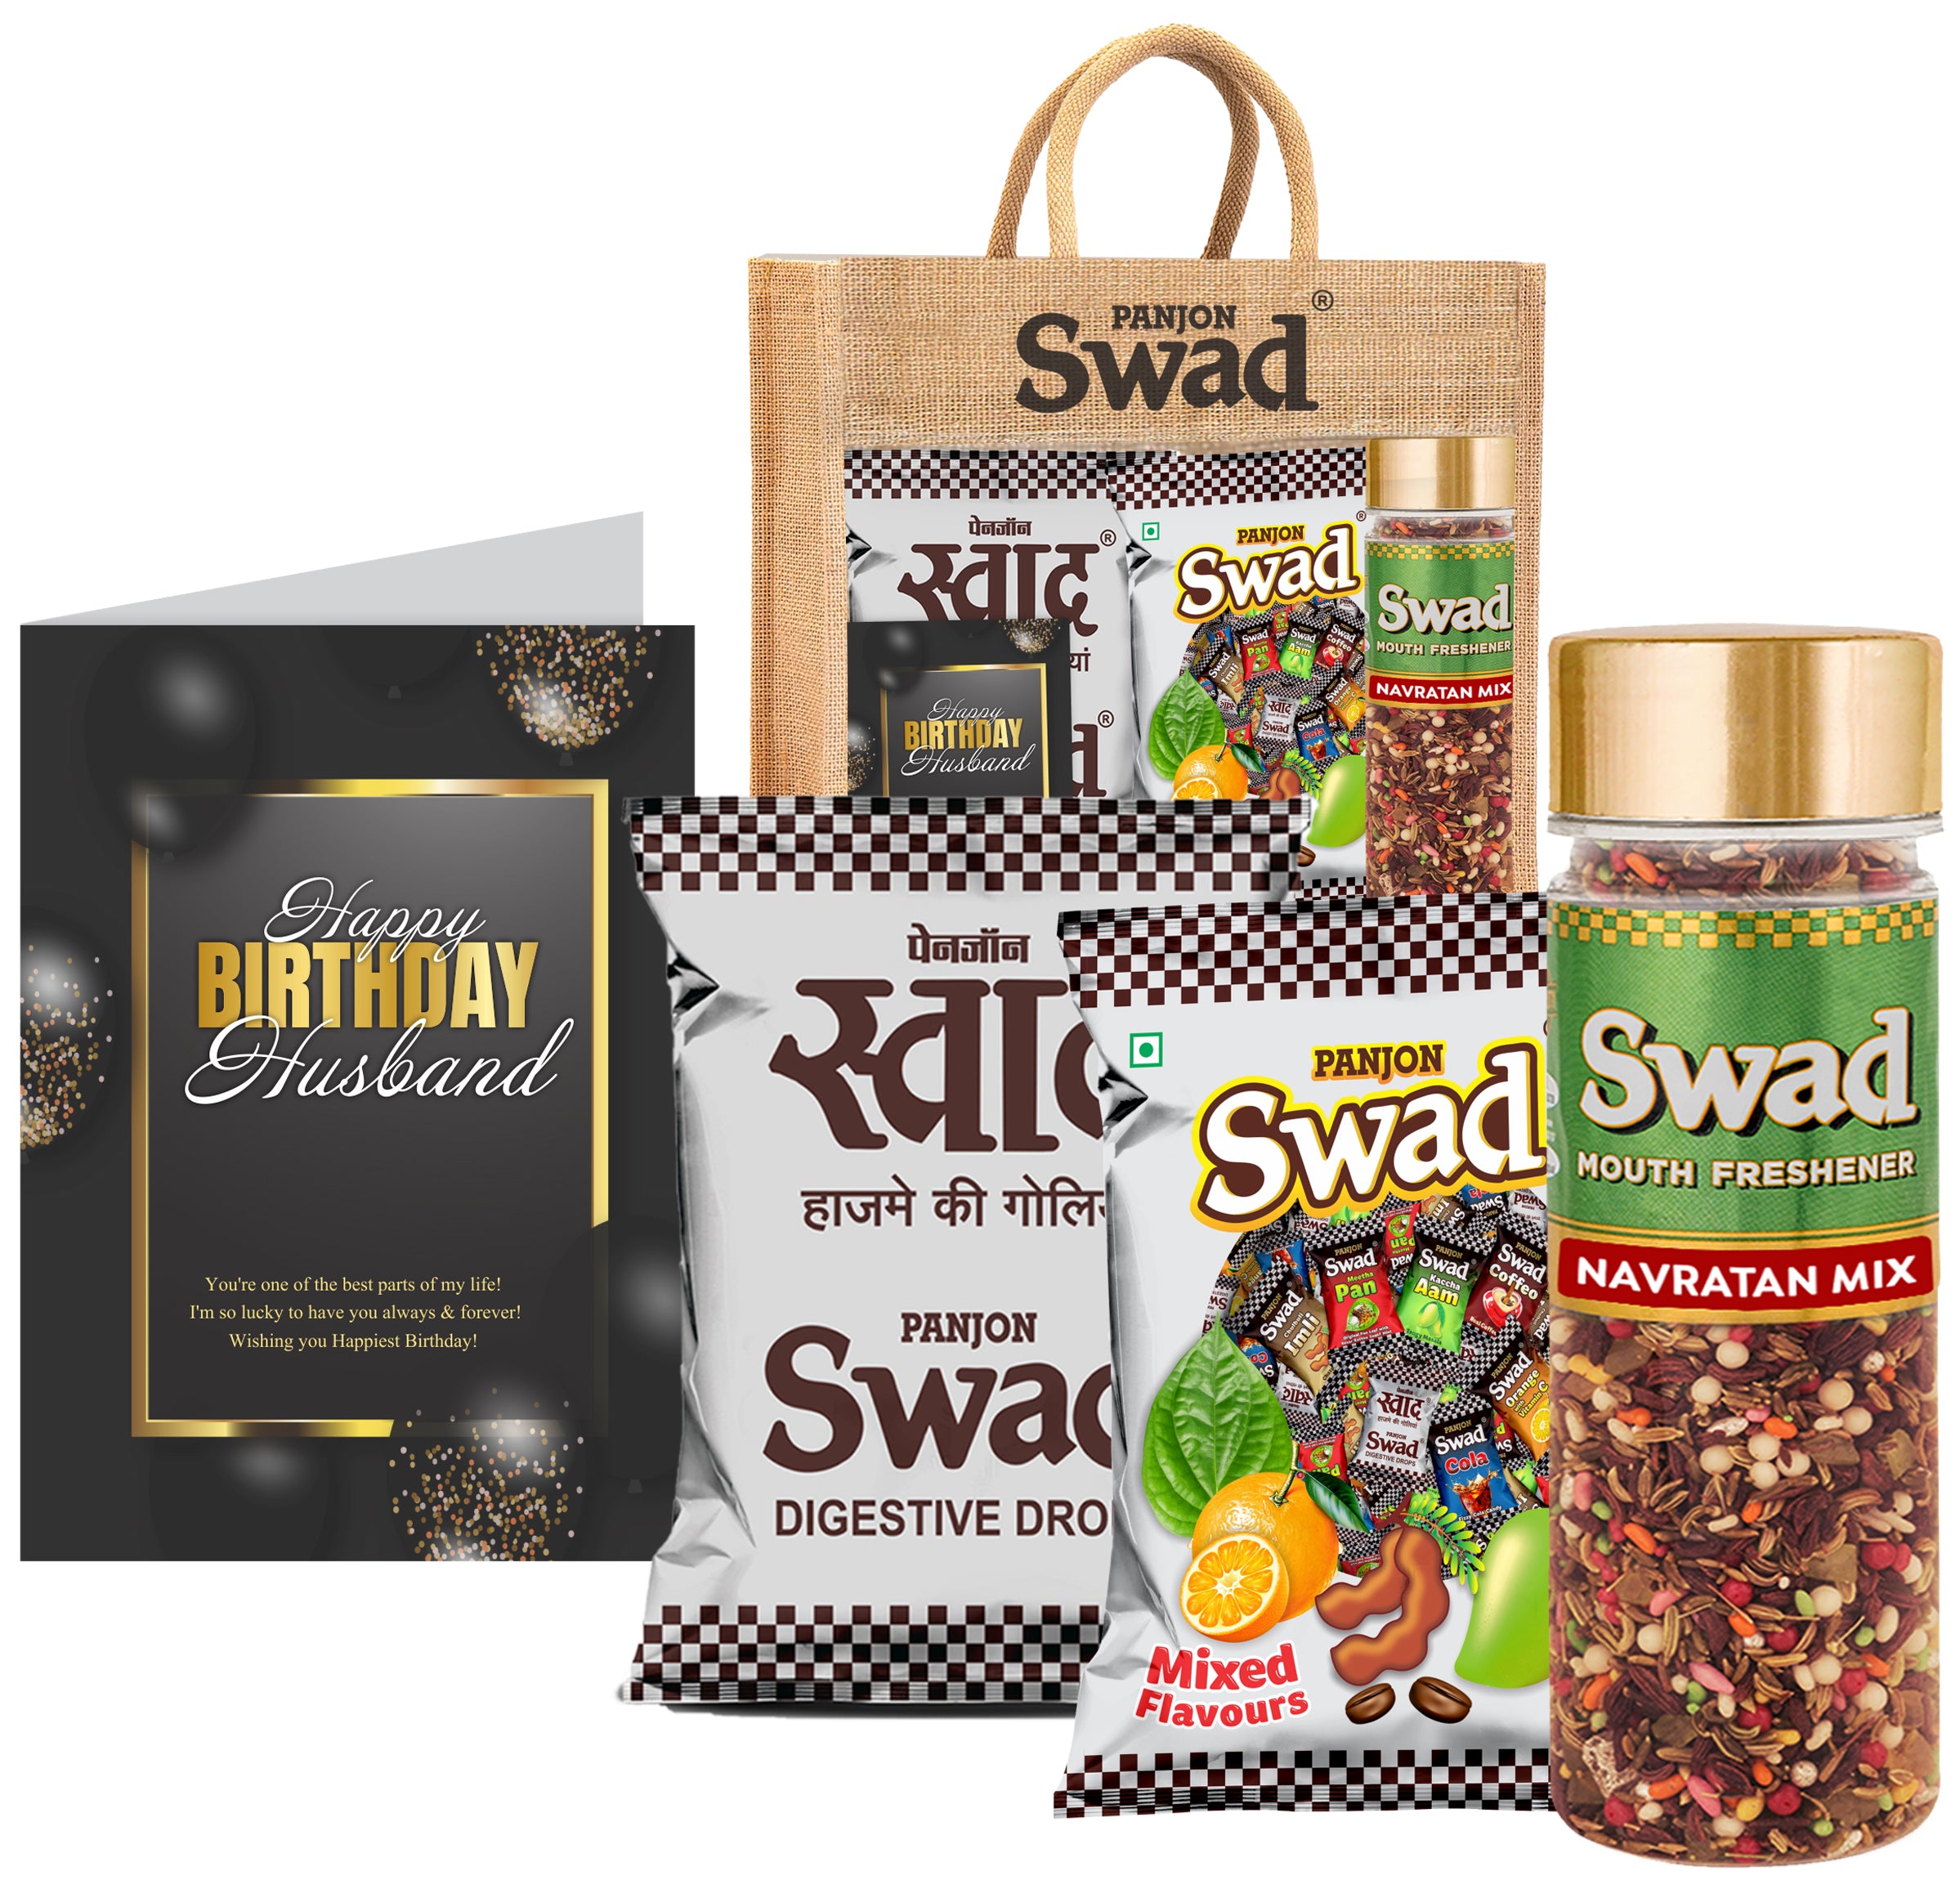 Swad Happy Birthday Husband Gift with Card (25 Swad Candy, 25 Mixed Toffee, Navratan Mix Mukhwas) in Jute Bag